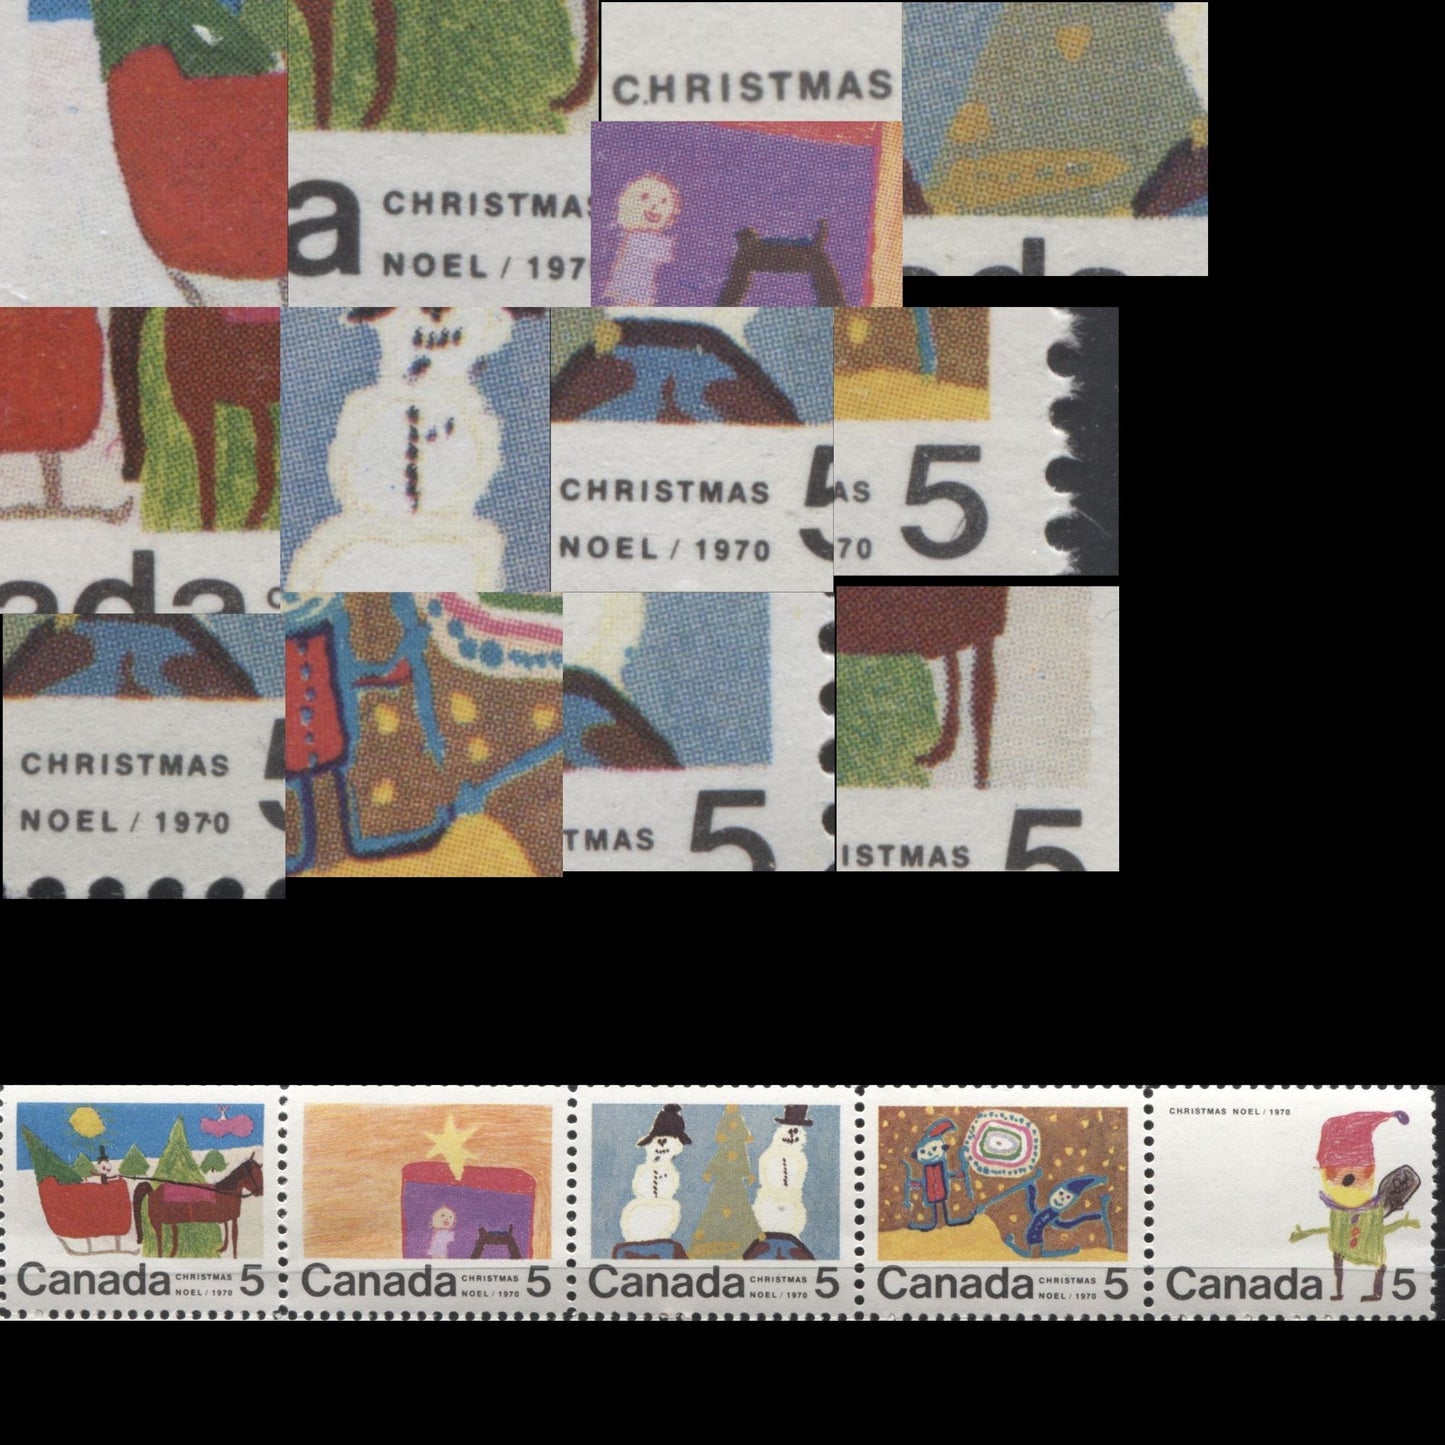 Lot 138 Canada #519-523 5c Multicoloured 1970 Christmas Issue, A Complete Set of 12 Constant Plate Varieties From Combination 5, Smooth HB12 Paper, Perf. 11.9